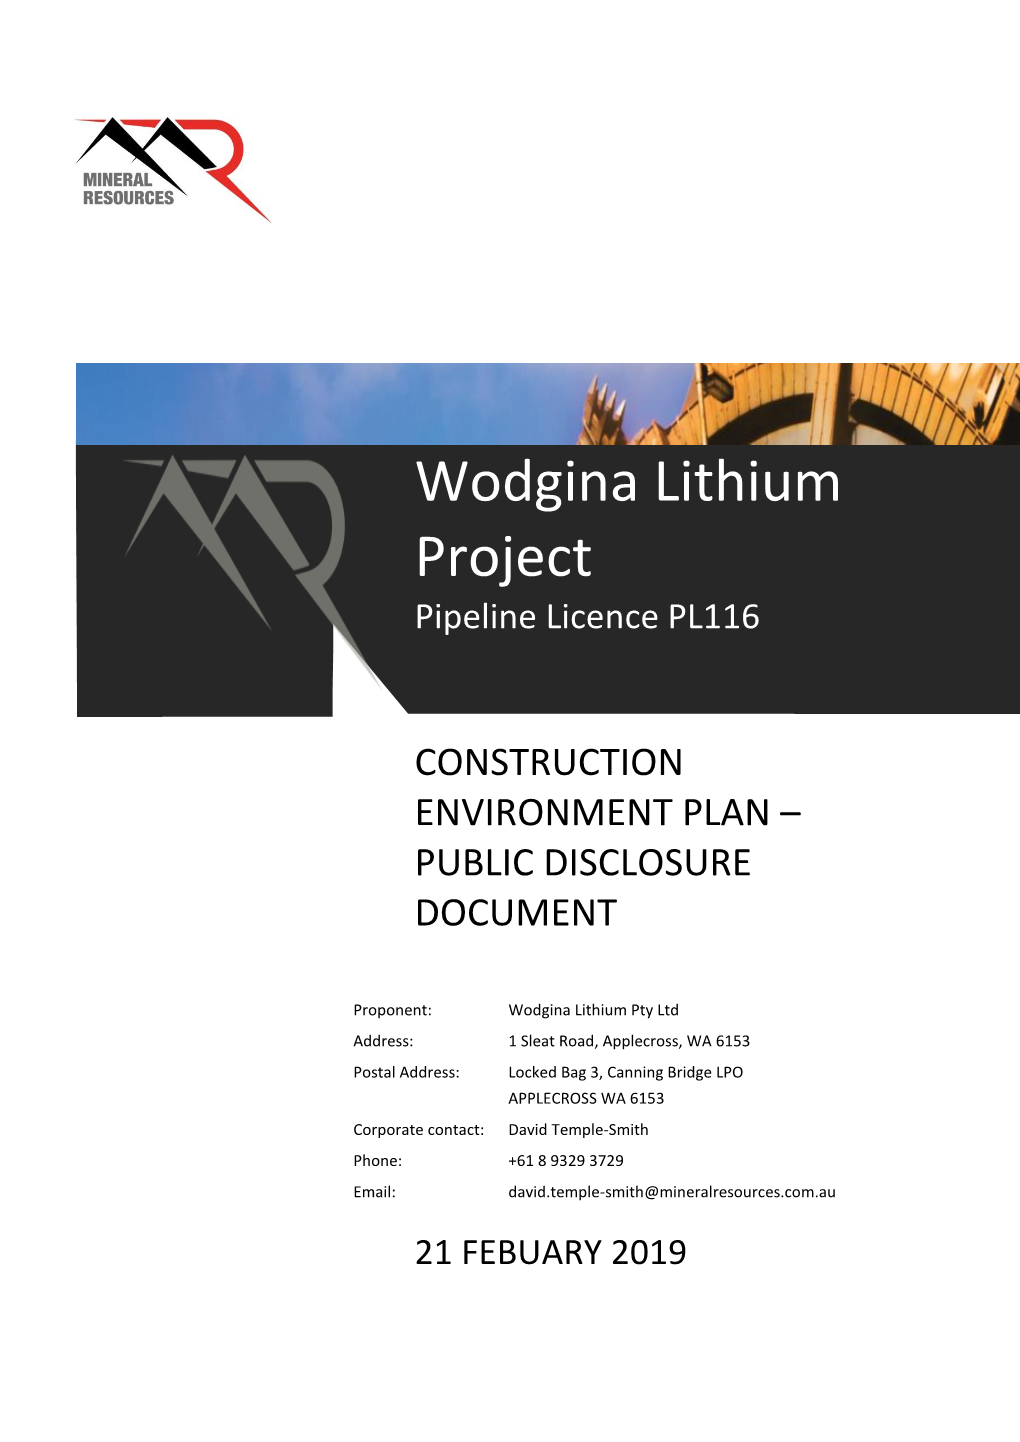 Wodgina Lithium Project Pipeline Licence PL116